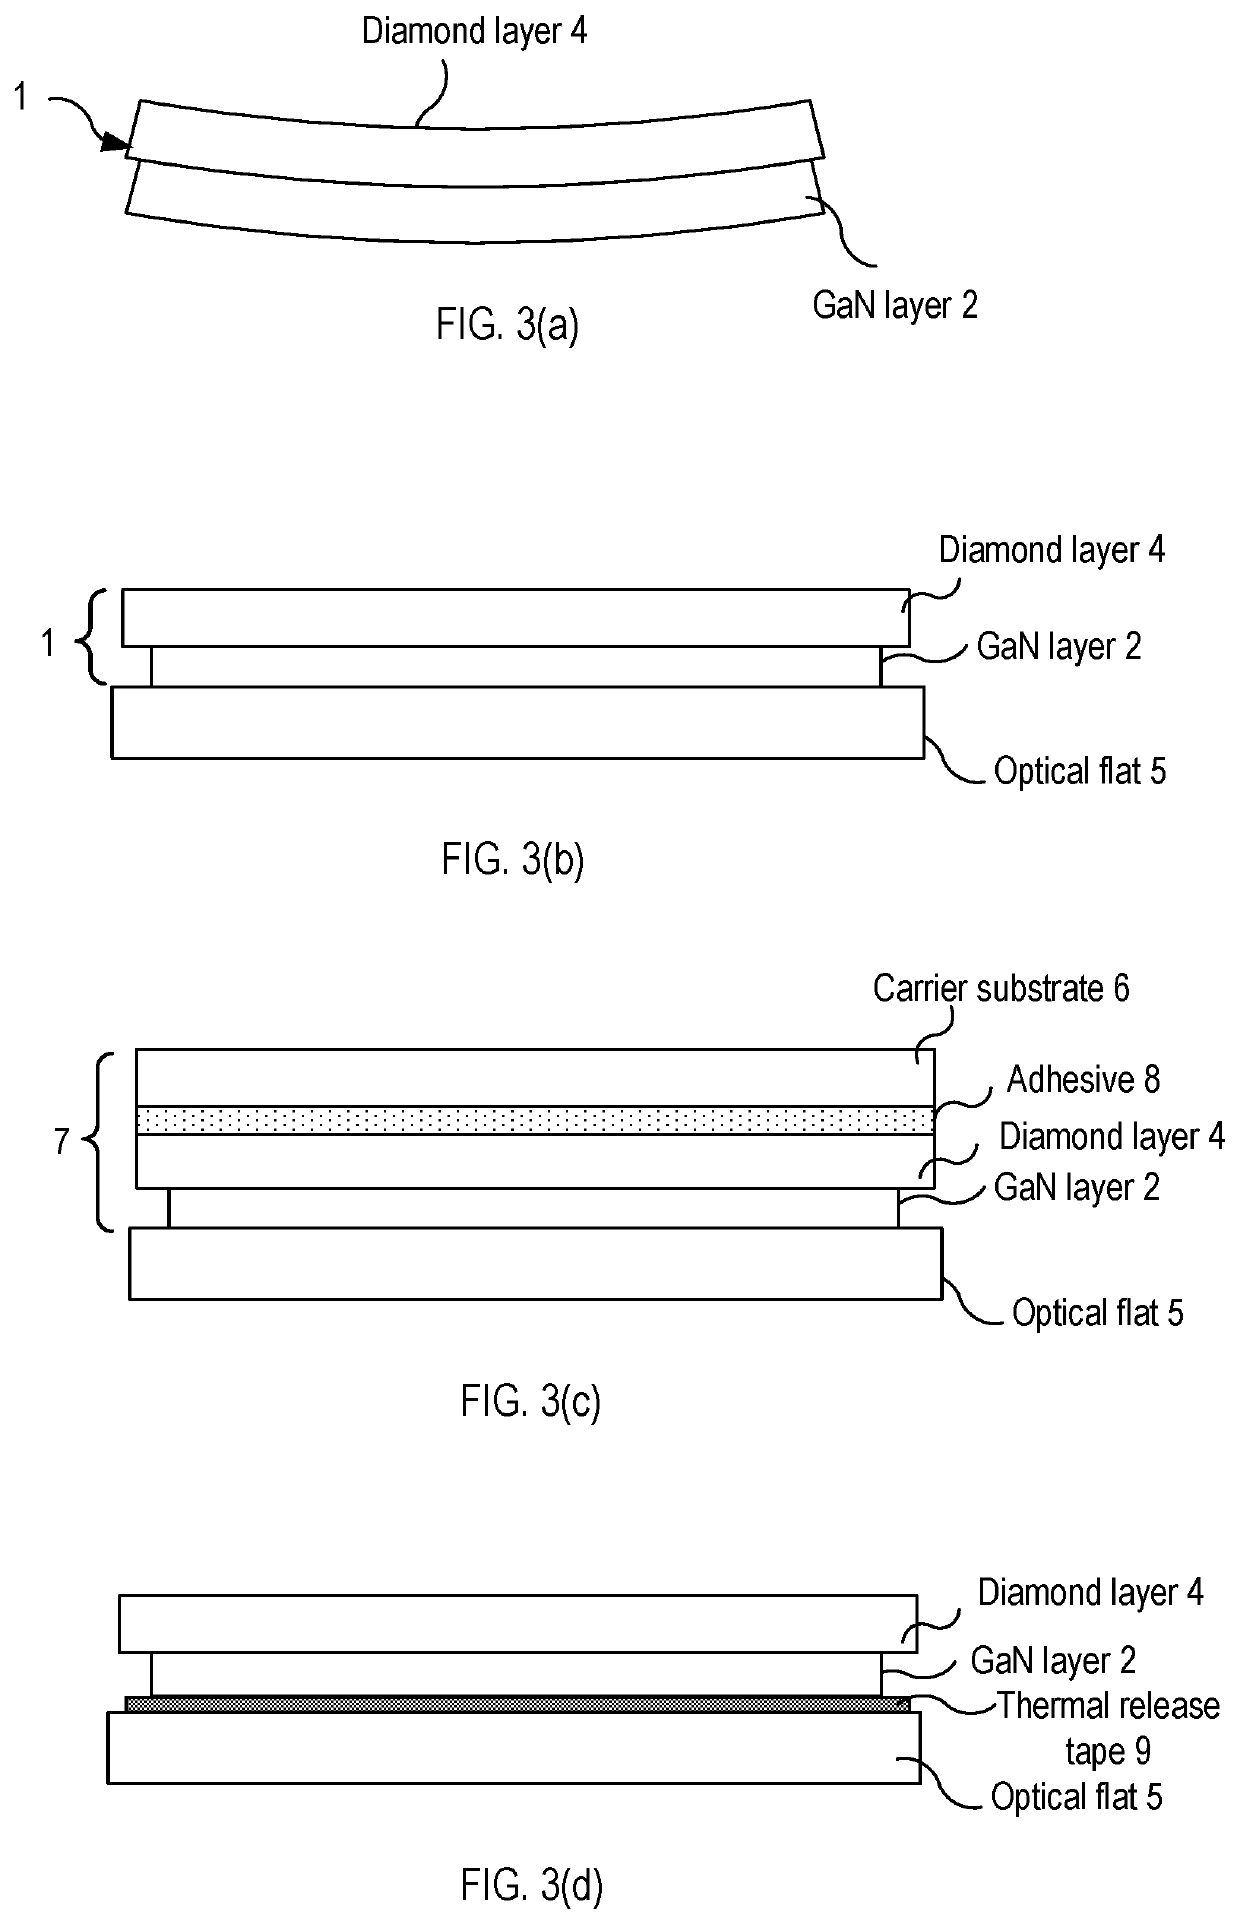 Mounting of semiconductor-on-diamond wafers for device processing